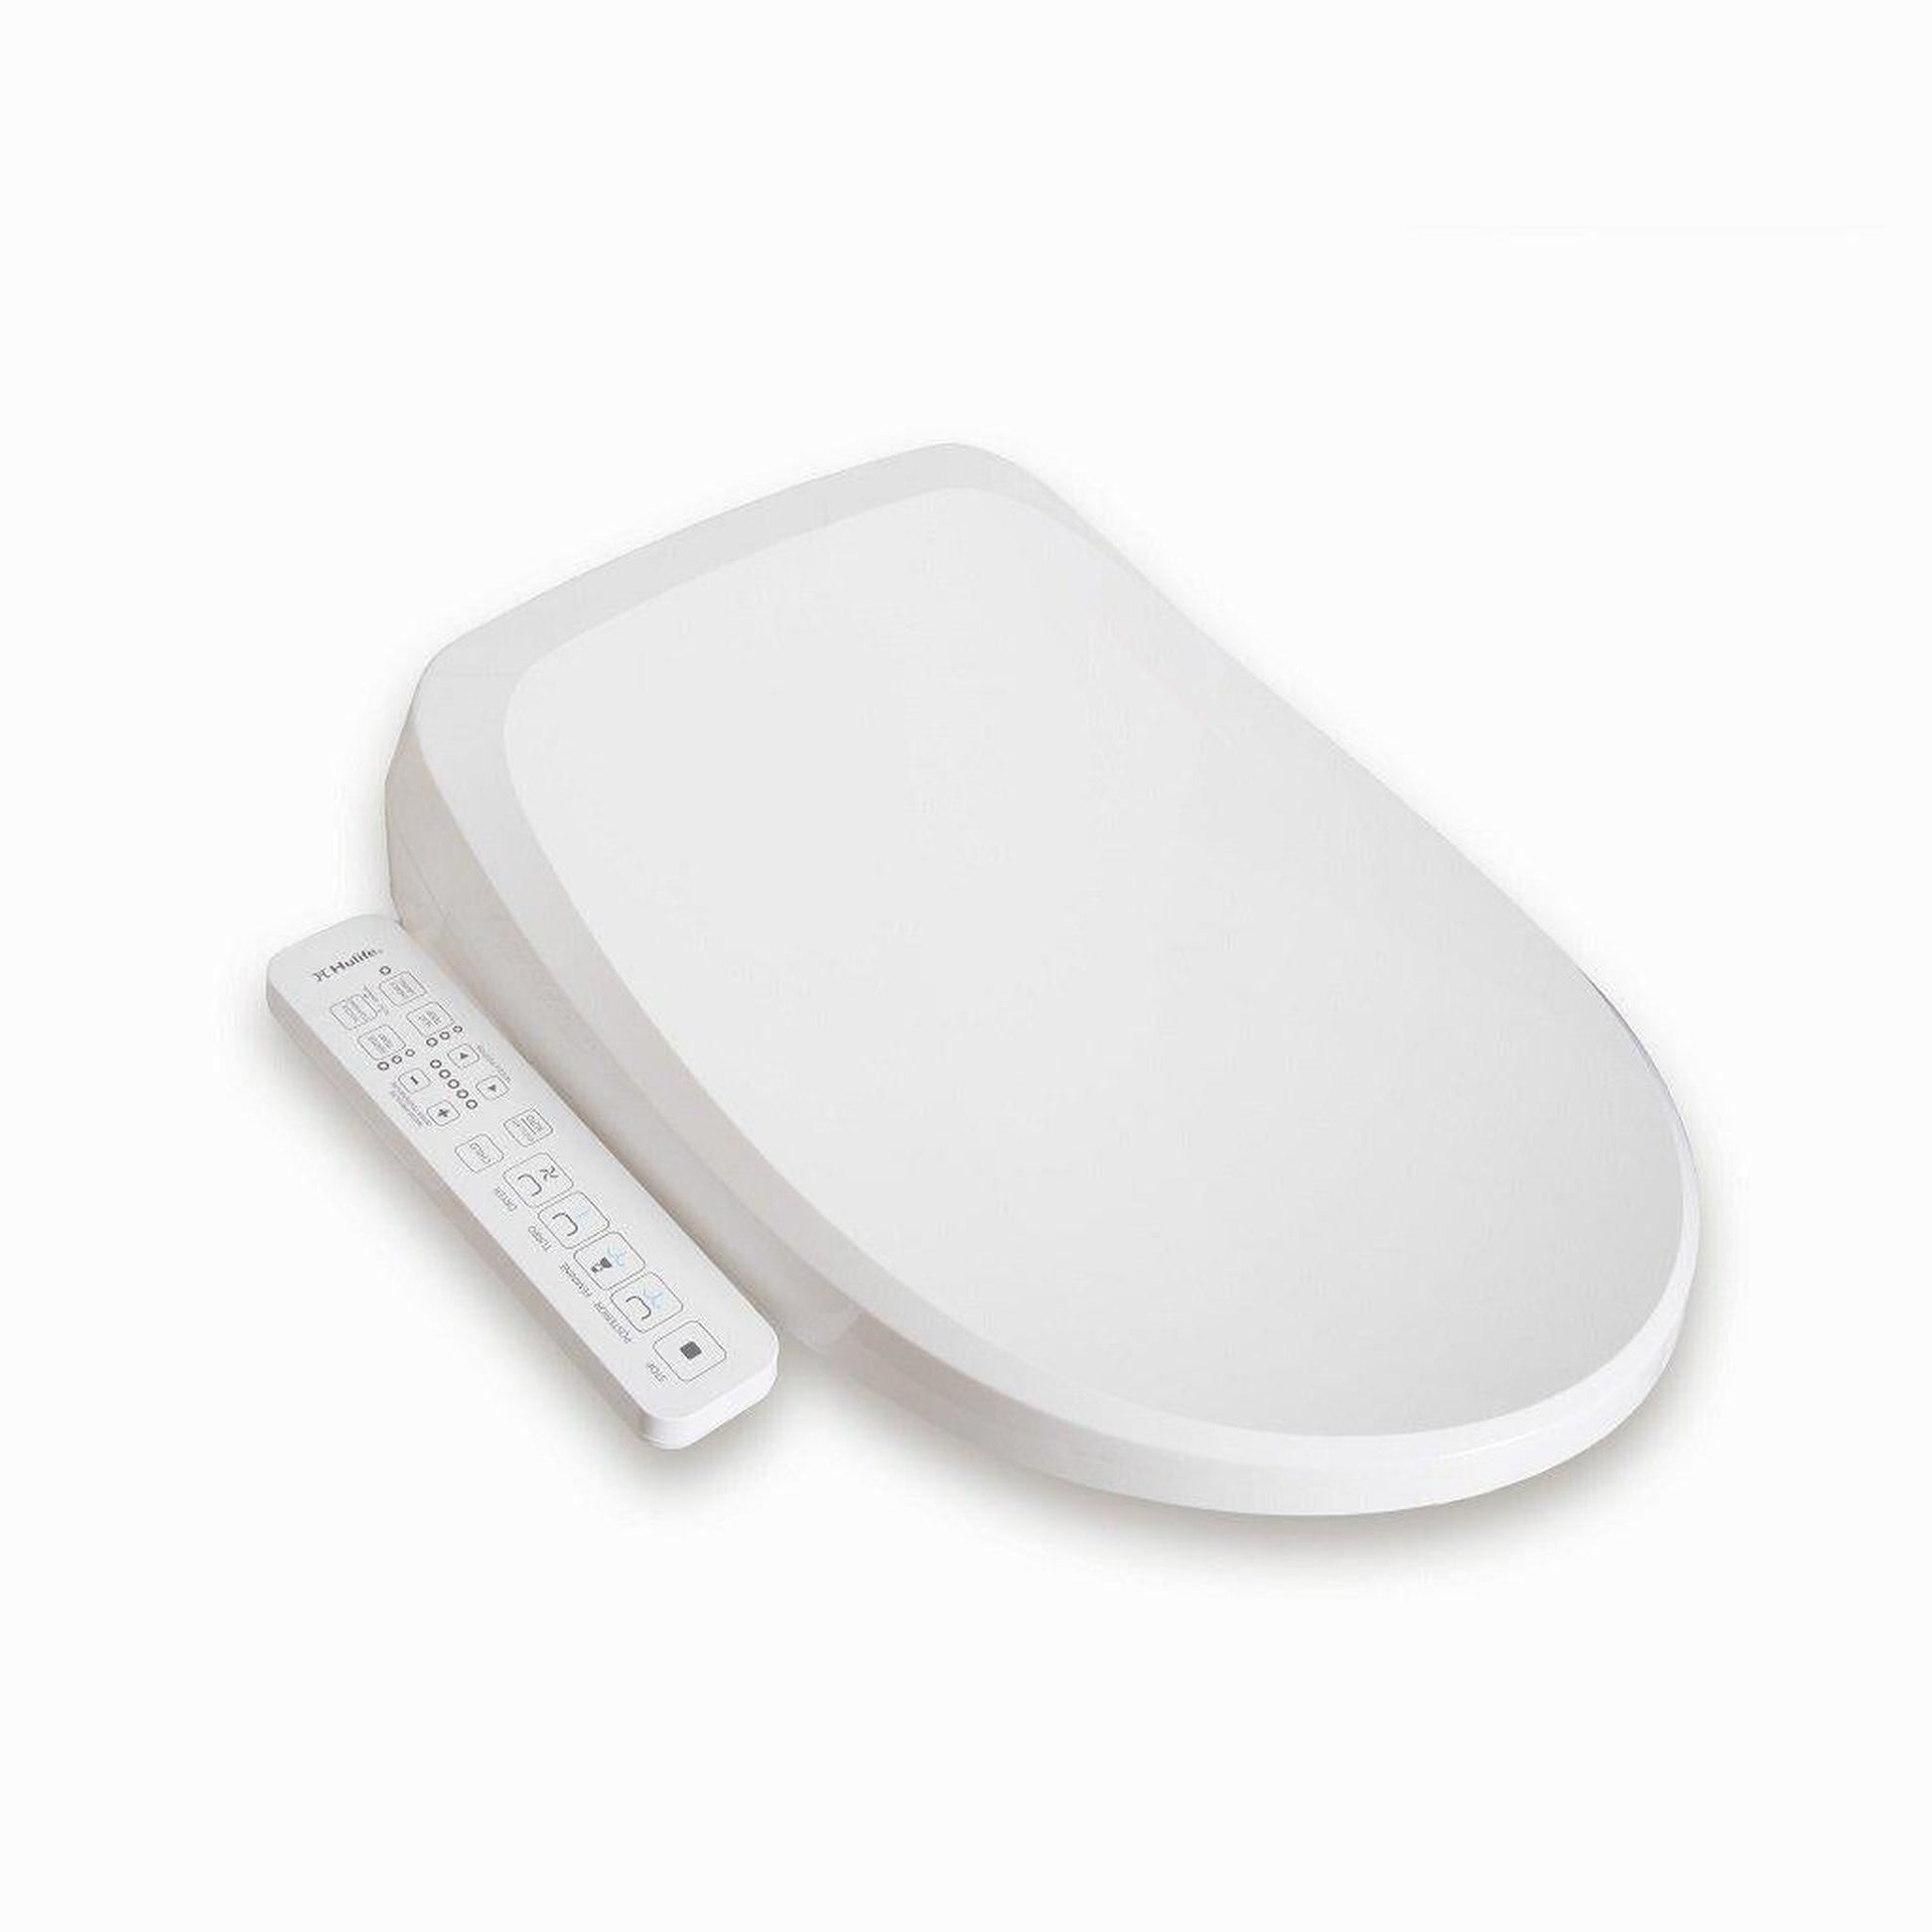 Hulife HLB-3000EC 21" Elongated White Electric Bidet Toilet Seat With Side Touch Control Panel